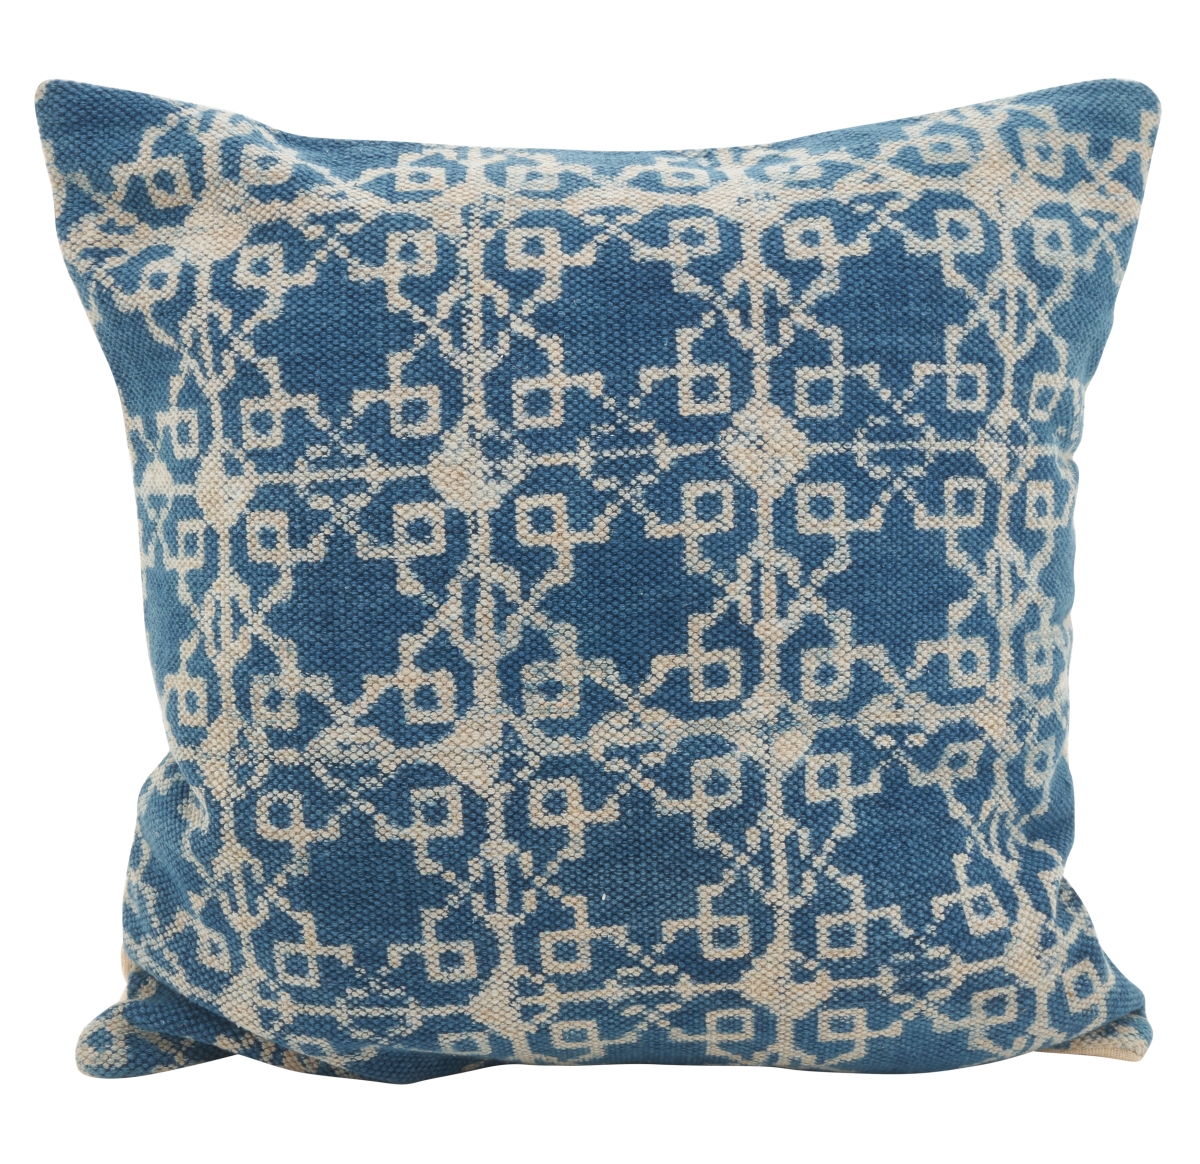 8408.in20s 20 In. Square Distressed Diamond Boho Down Filled Throw Pillow - Indigo